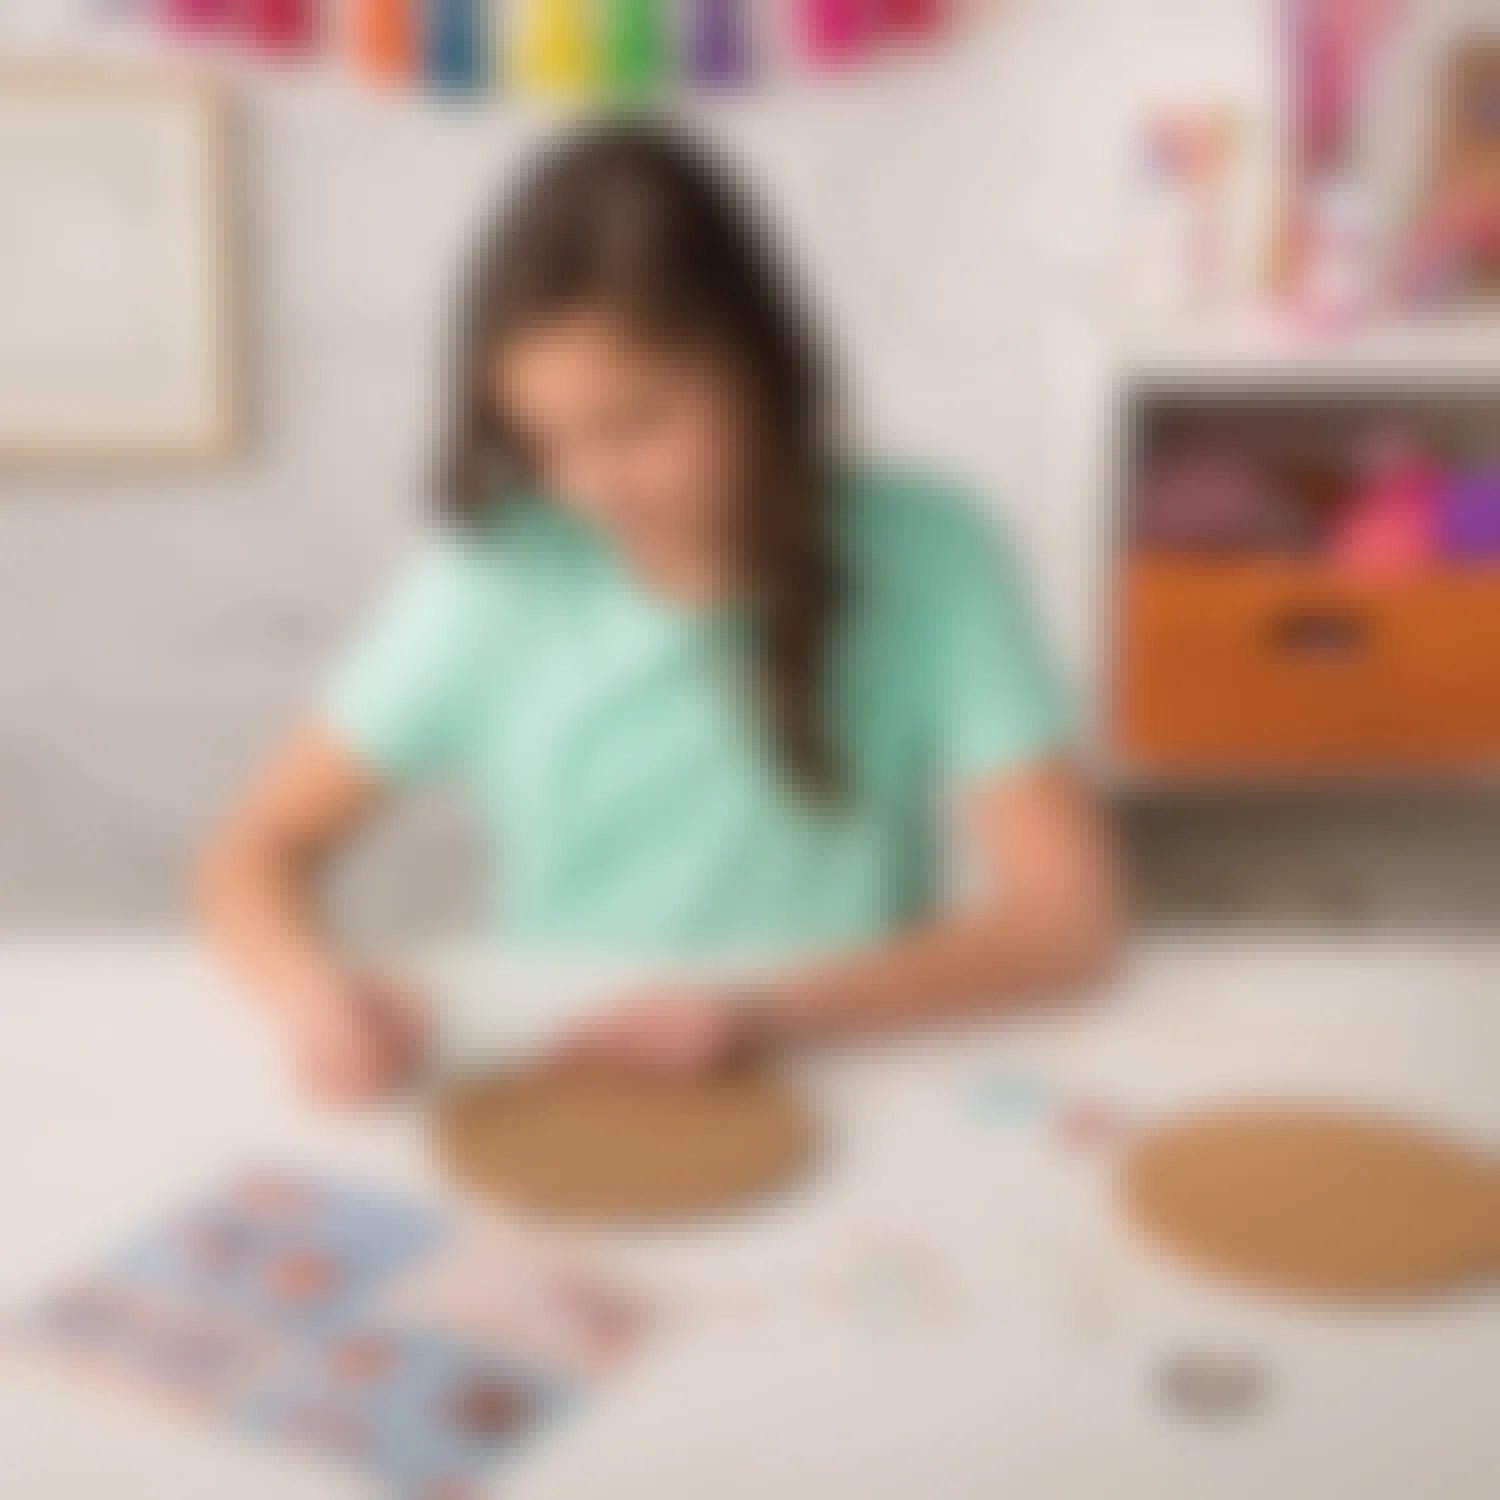 A girl doing crafts at a table with cork board circles